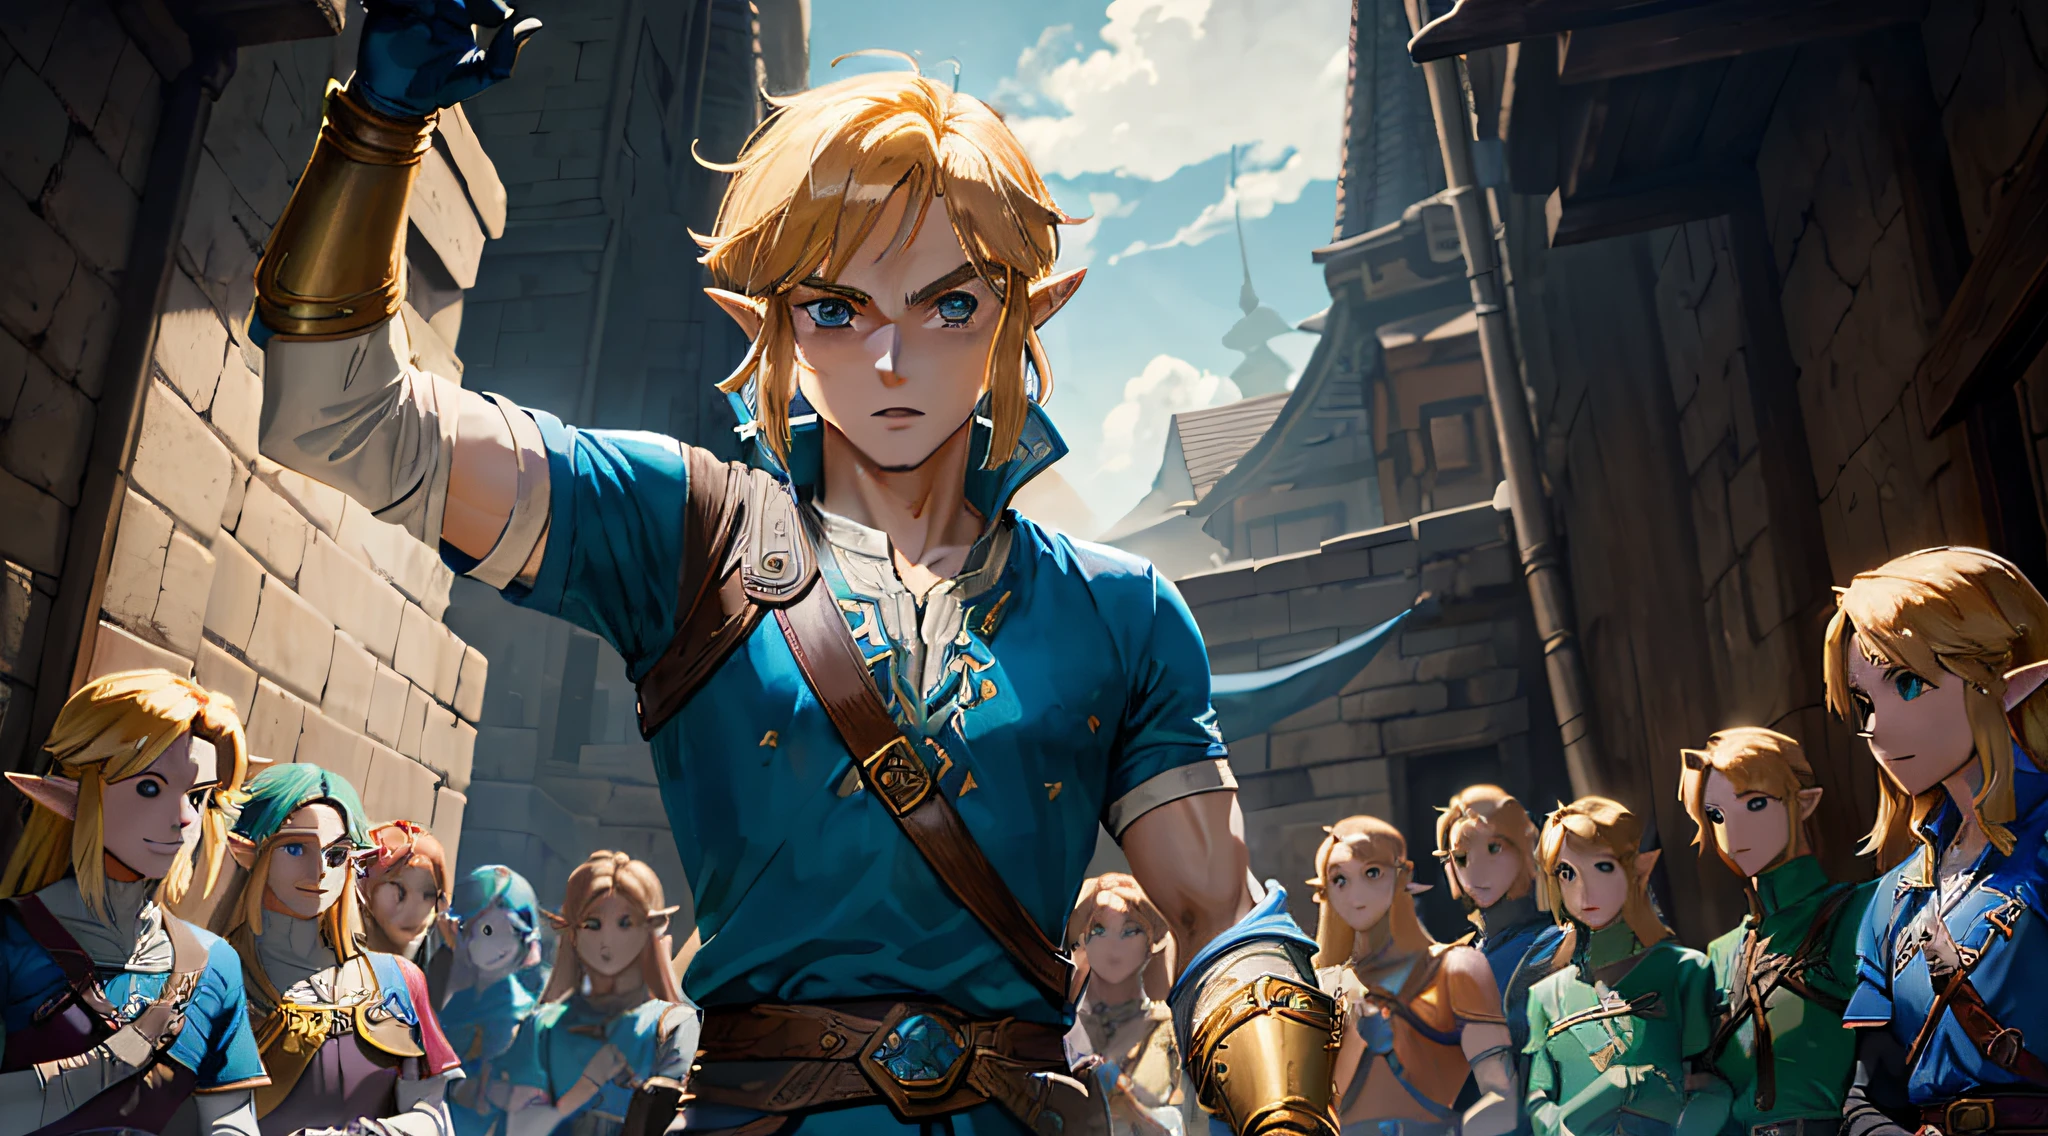 there are many people standing in a street with a link link, a portrait of link, link from the legend of zelda, link from zelda, link the movie, ocarina of time movie, legend of zelda, from legend of zelda, zelda breath of the wild, botw, breath of the wild, the legend of zelda, link from zelda using computer